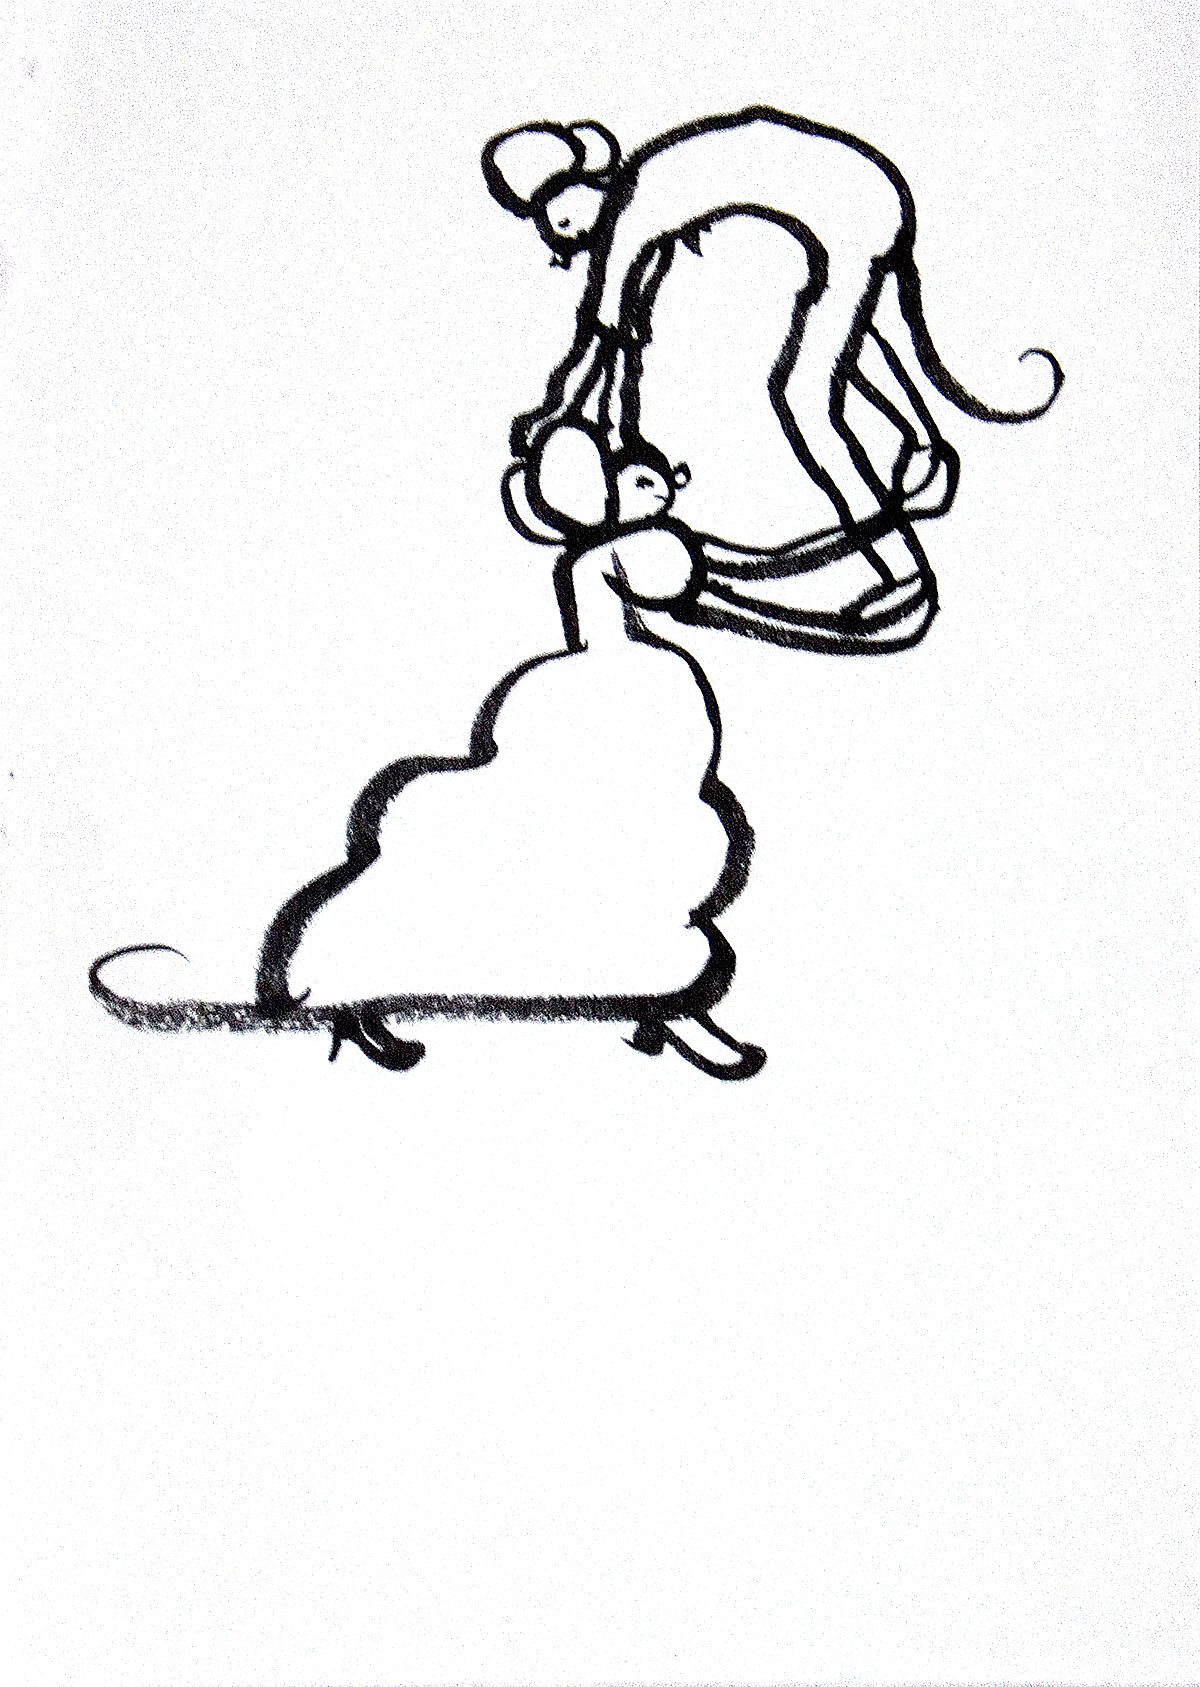 untitled (2 mice), 15 x 10 cm, ink on paper, 2003